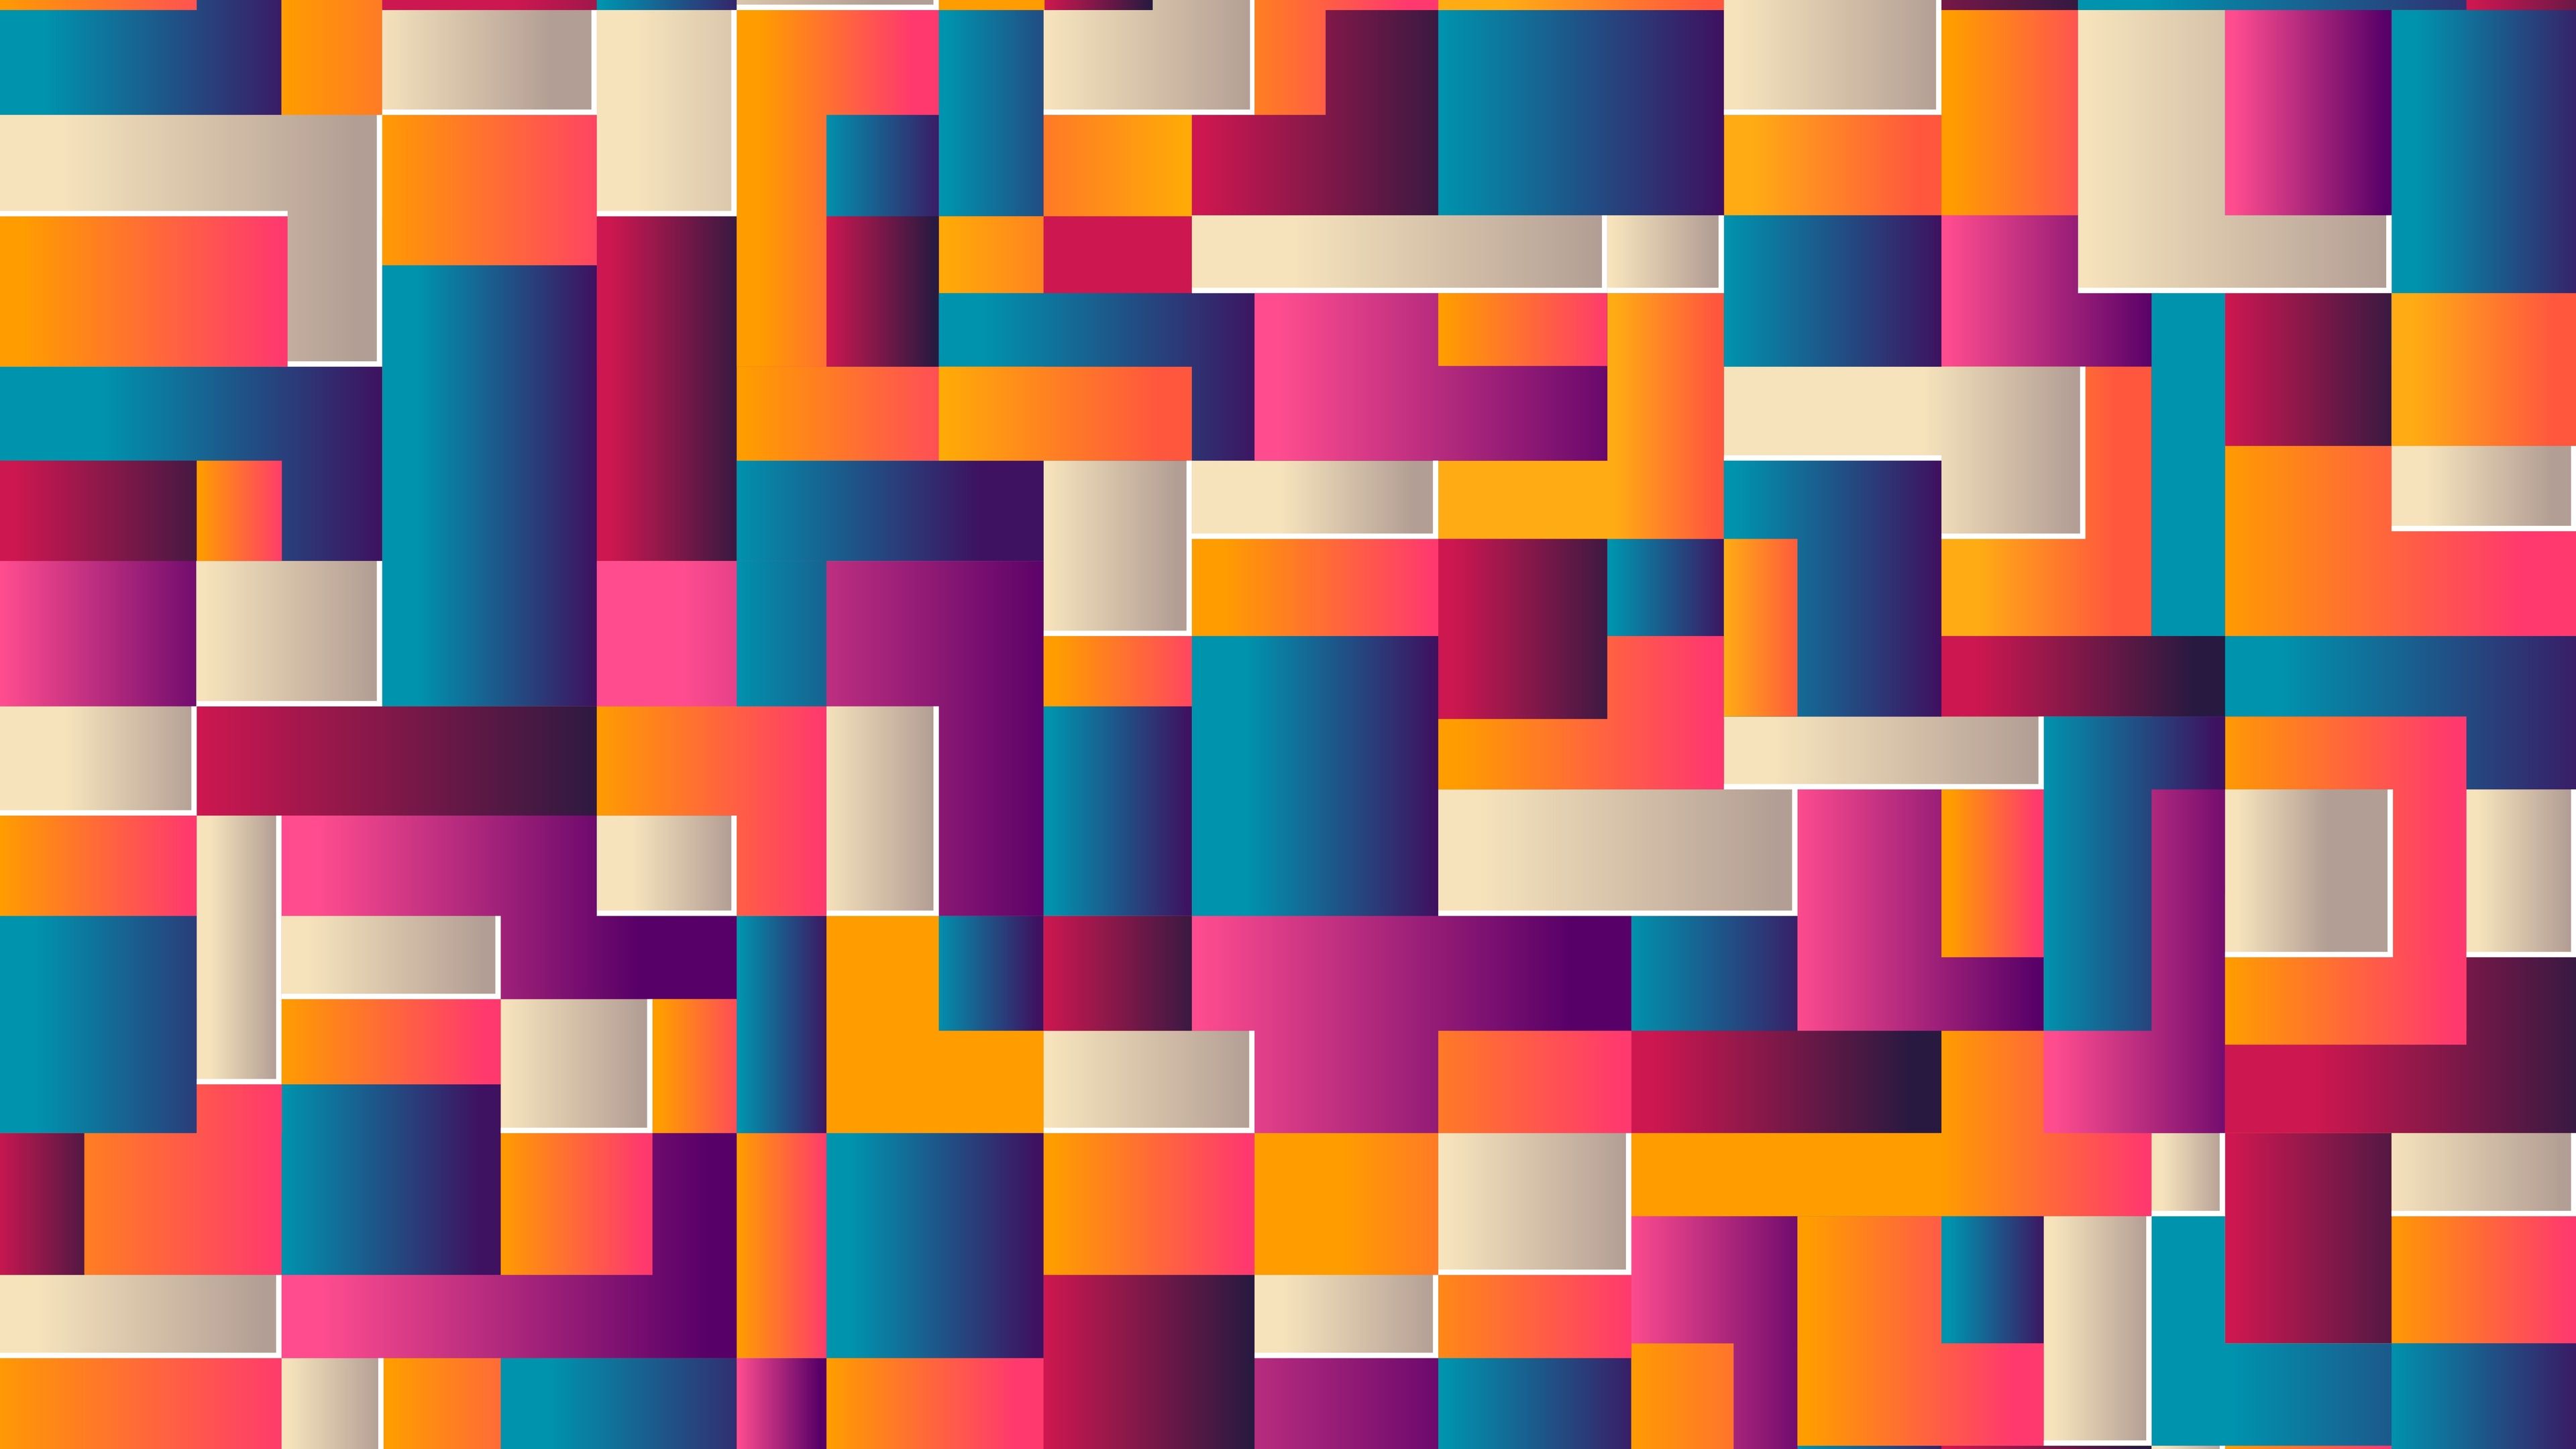 Colorful Shapes Abstract Shapes Wallpaper, Hd Wallpaper, Colorful Wallpaper, Abstract Wallpaper, 5k. Colorful Wallpaper, Abstract Wallpaper, Graphic Wallpaper